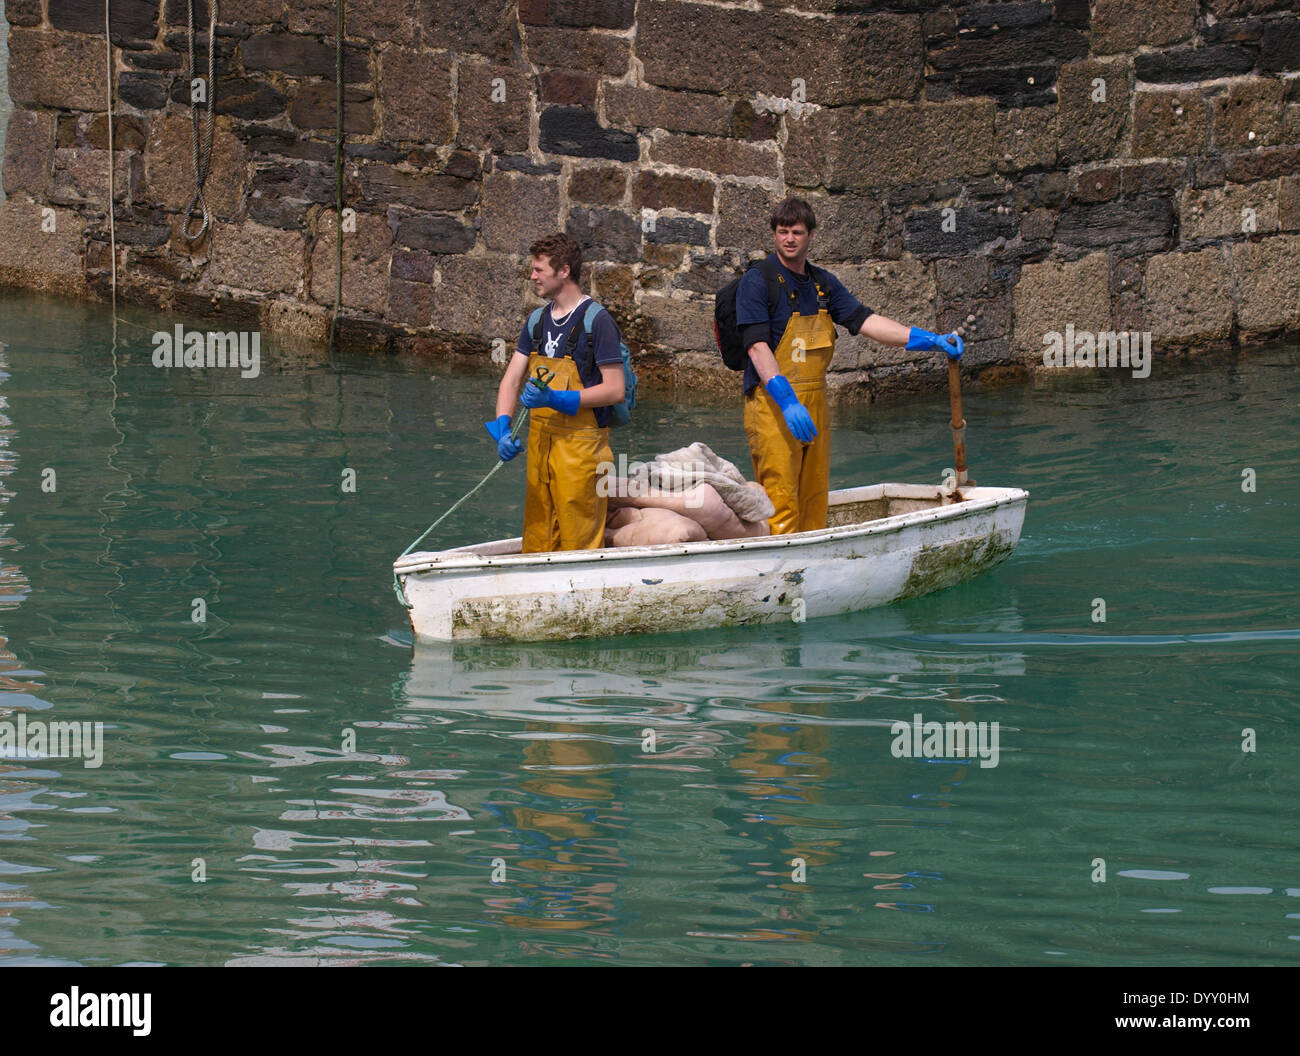 Two fishermen heading for shore in a dinghy using the one oar propulsion method, Newquay, Cornwall, UK Stock Photo